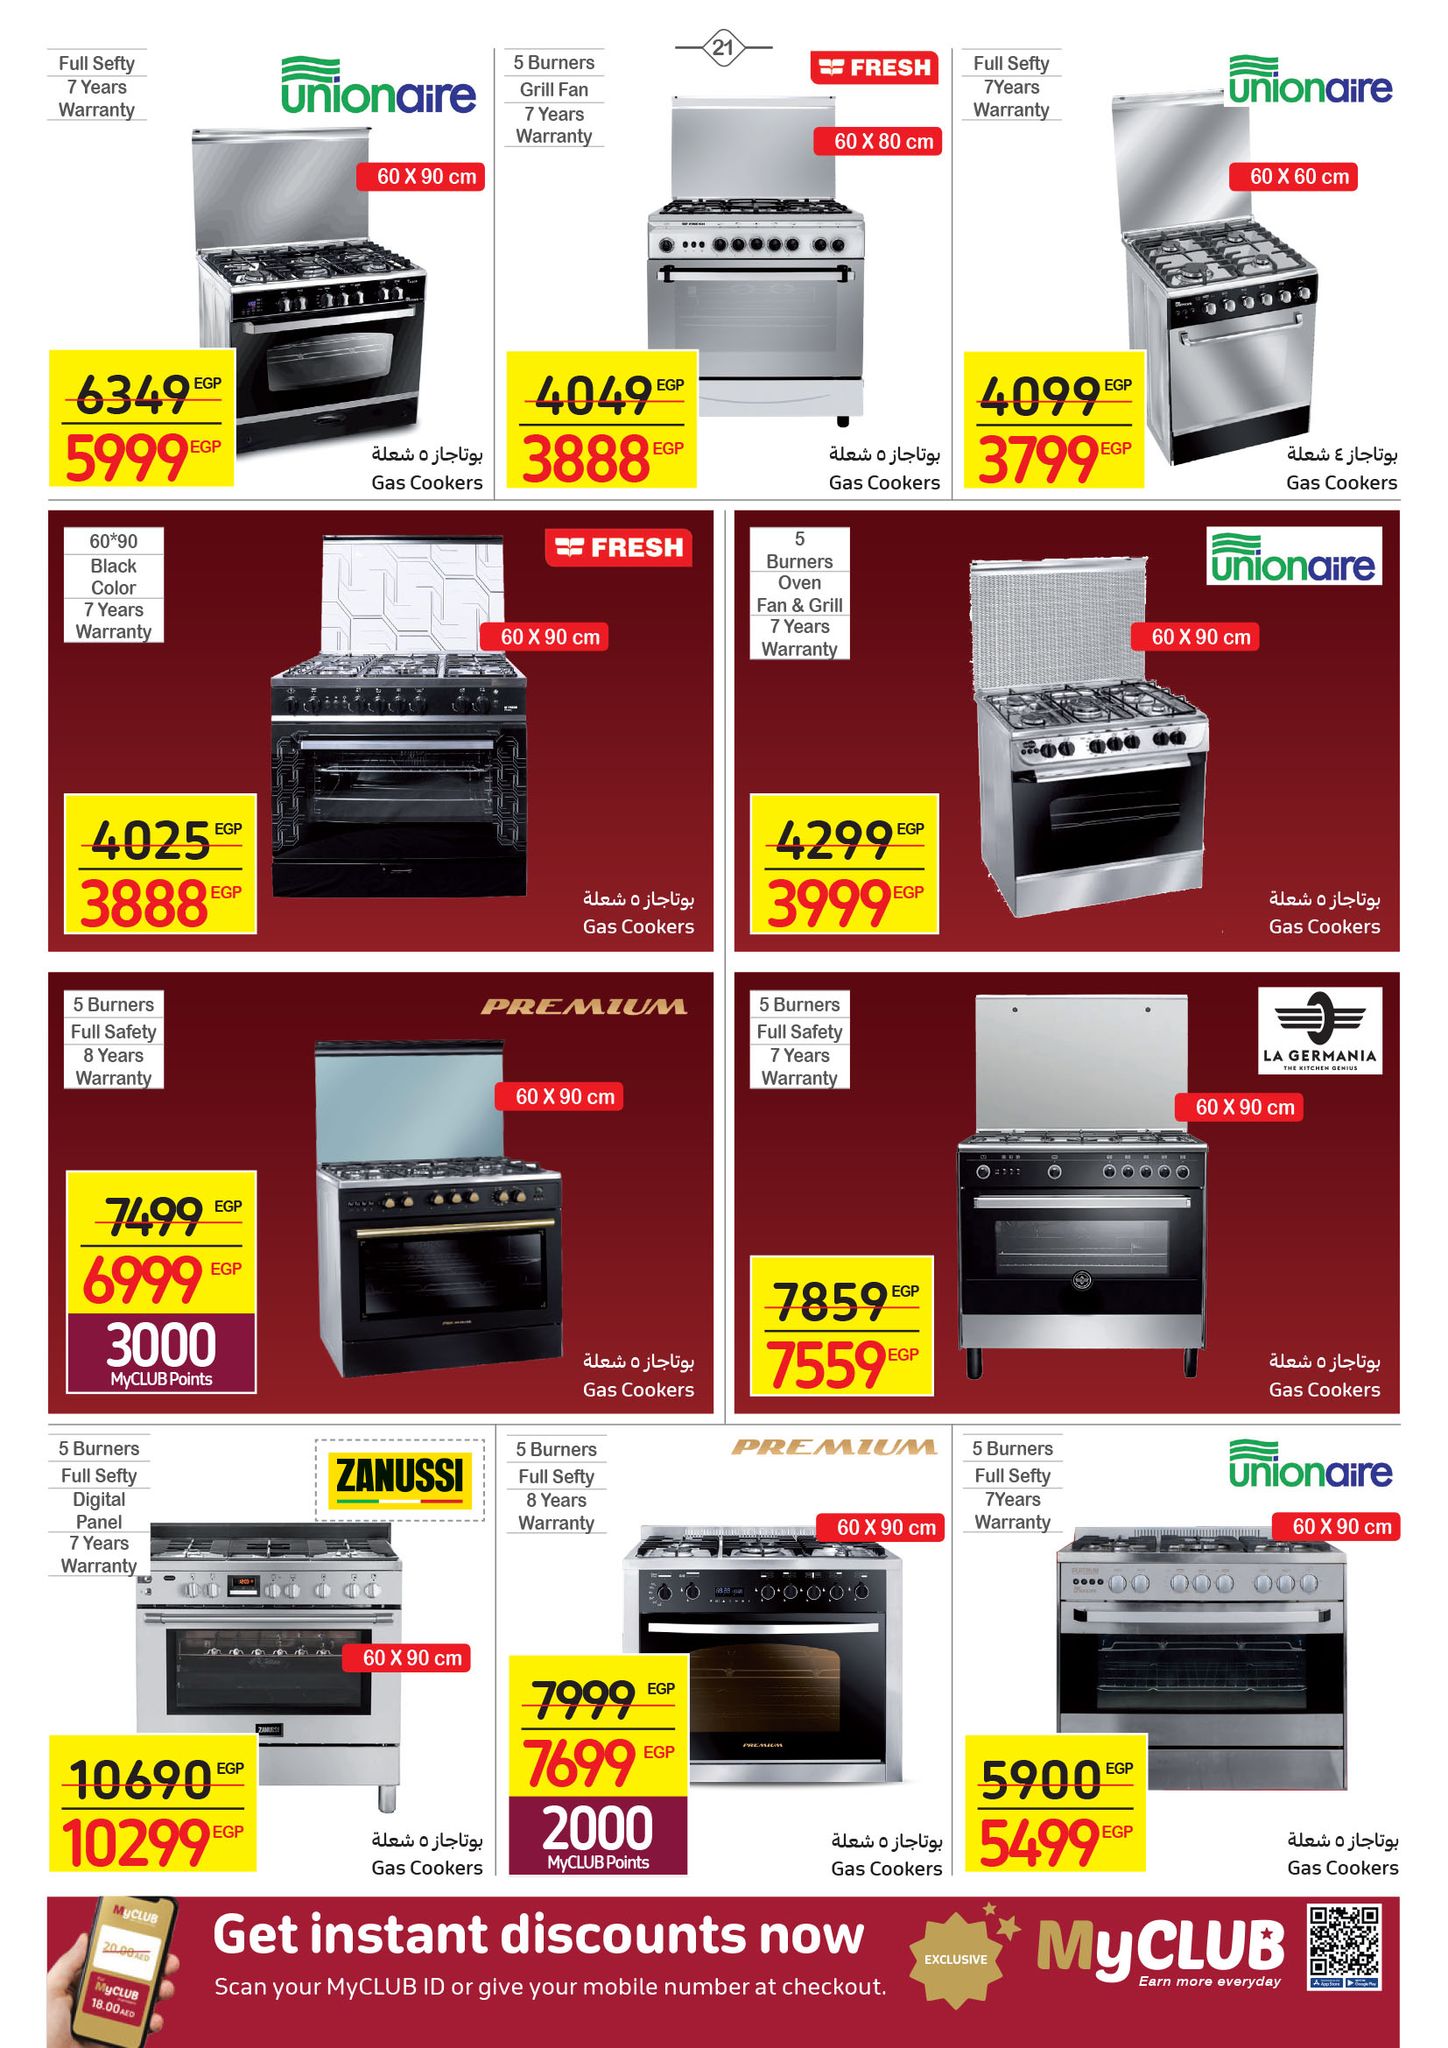 Watch the latest Carrefour half price offers "Last Chance Offer" until December 4, 21